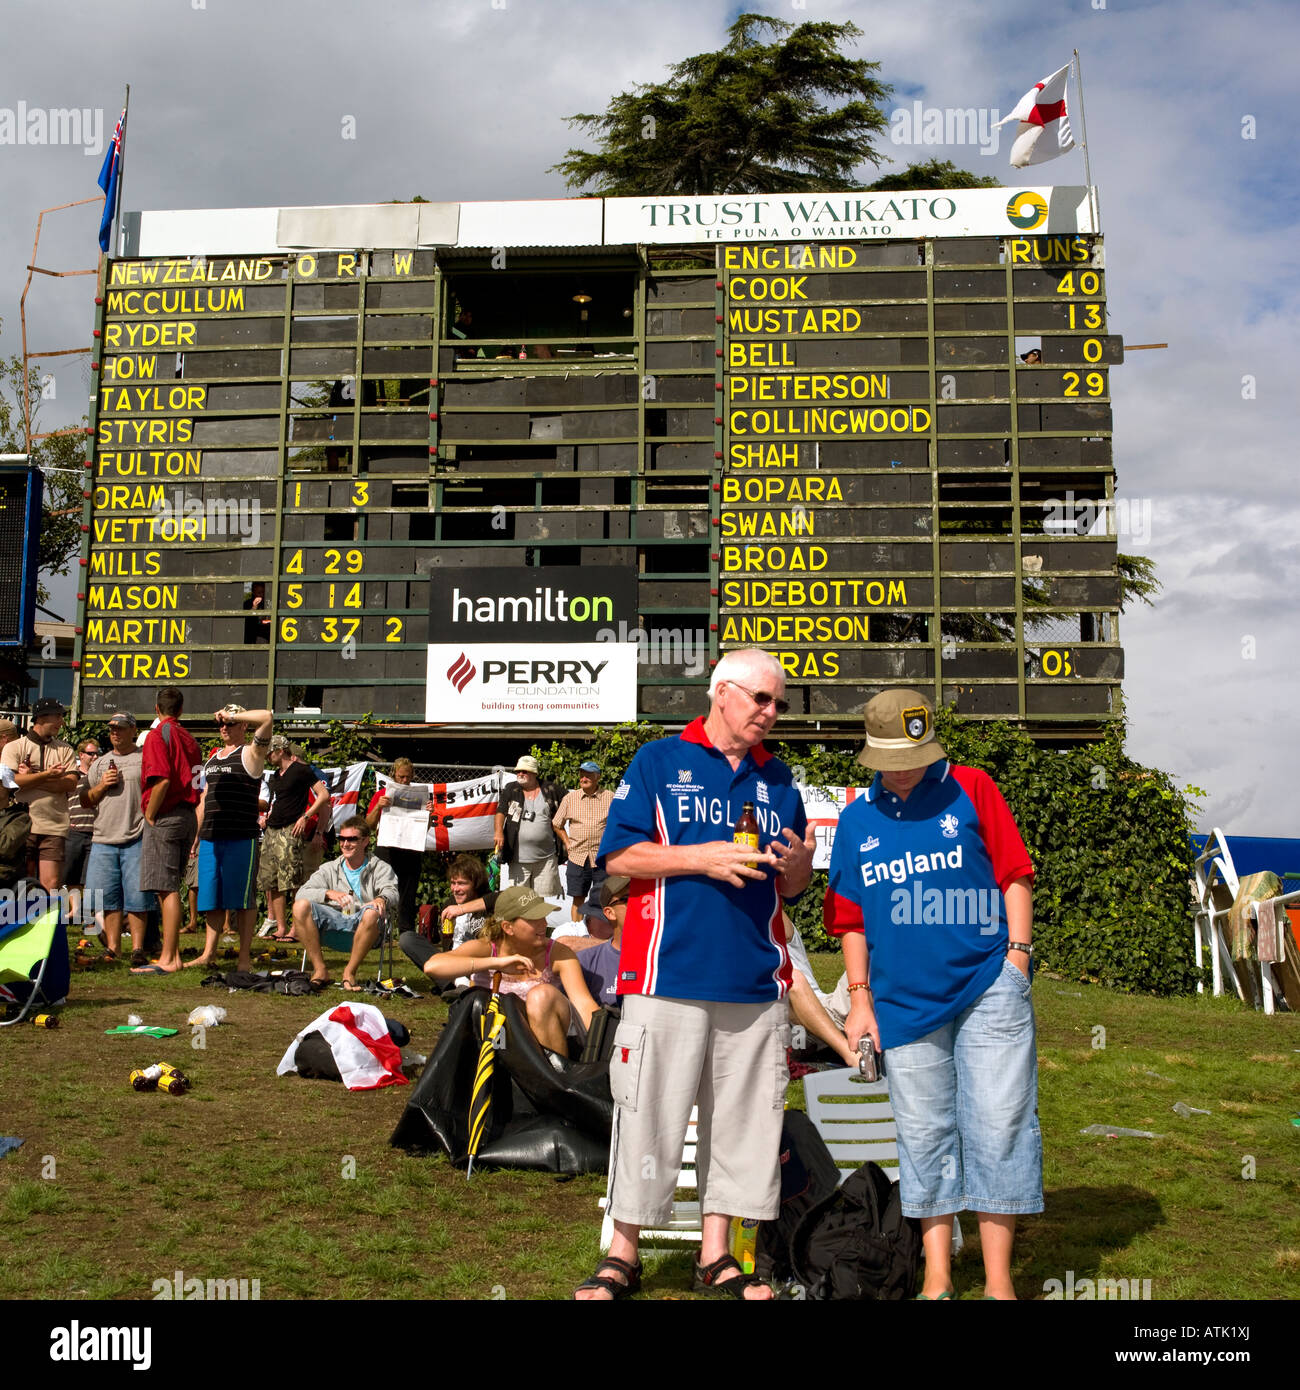 New Zealand v England scoreboard with fans and supporters on embankment Stock Photo